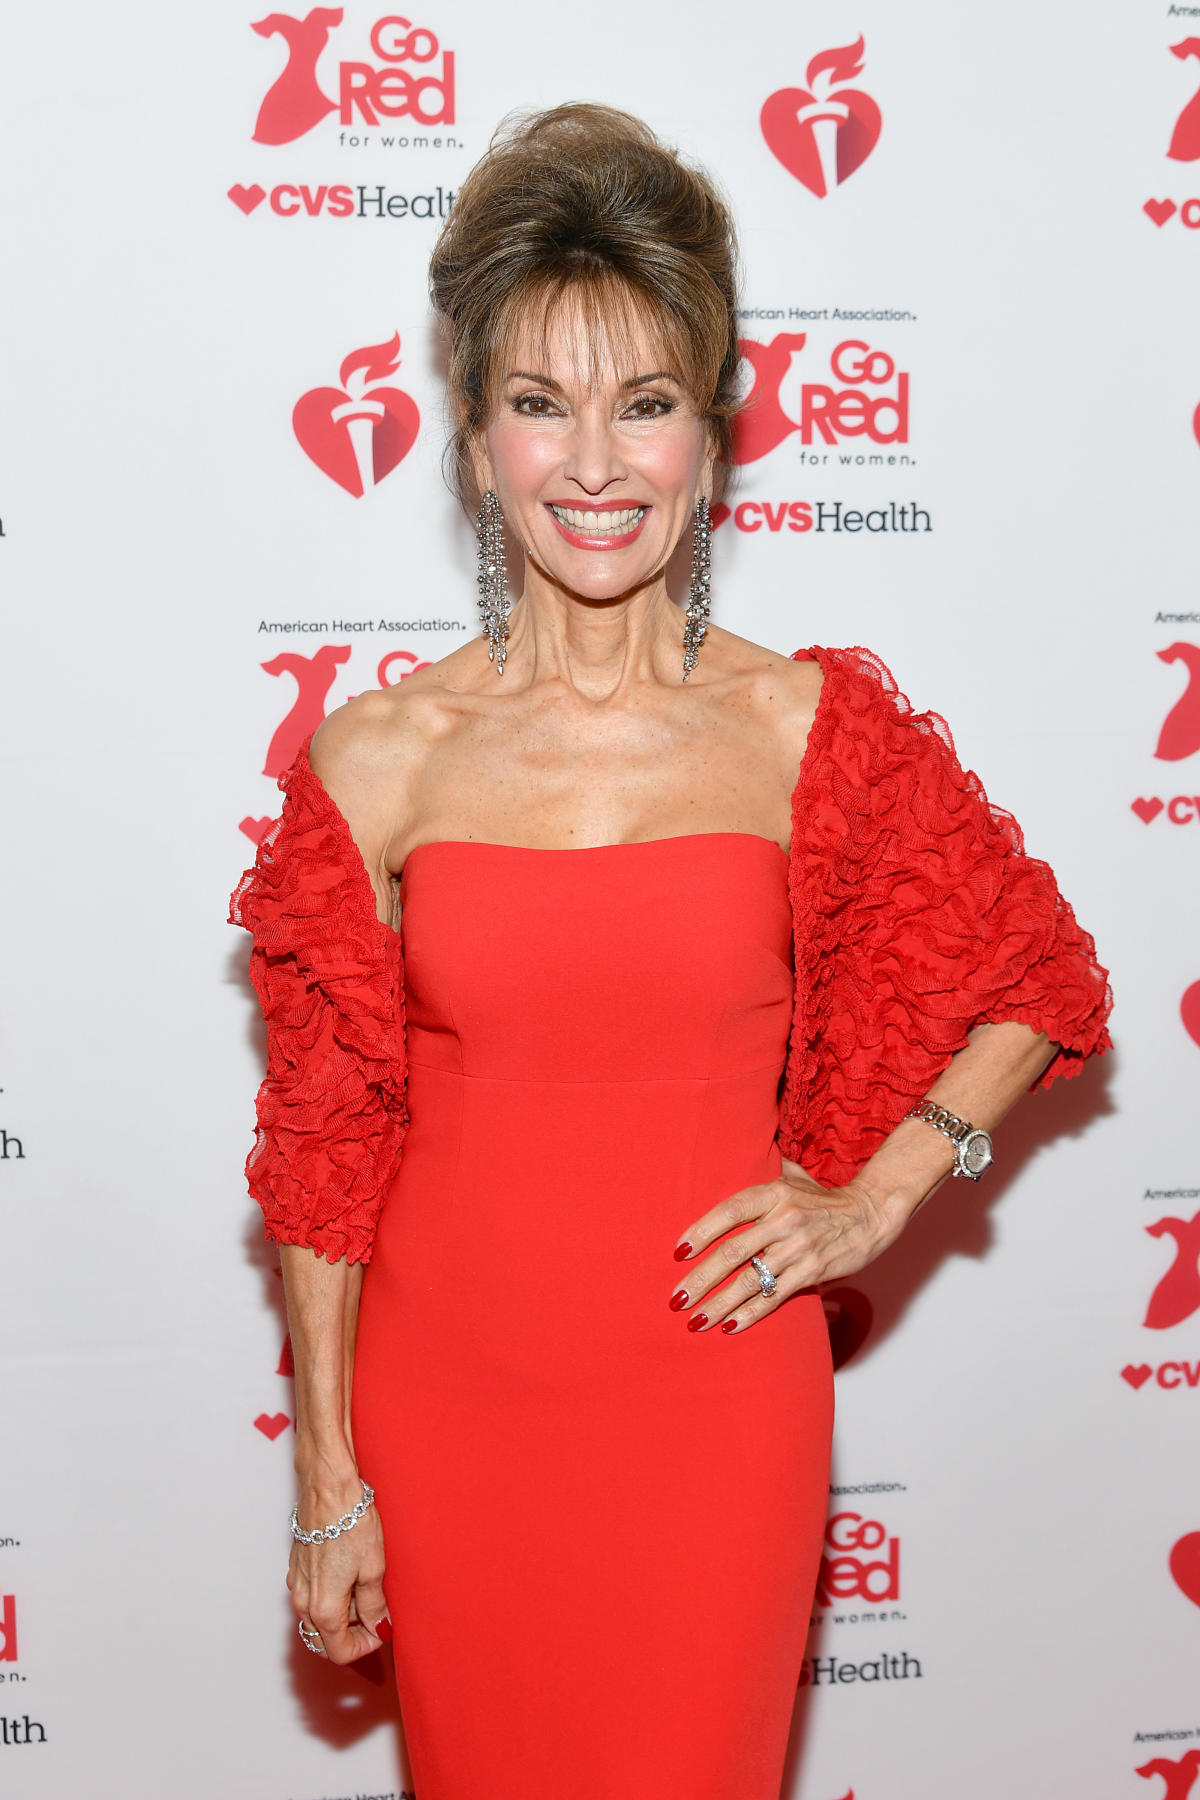 Susan Lucci 75 Opens Up About Undergoing Second Heart Procedure Be Your Own Advocate 